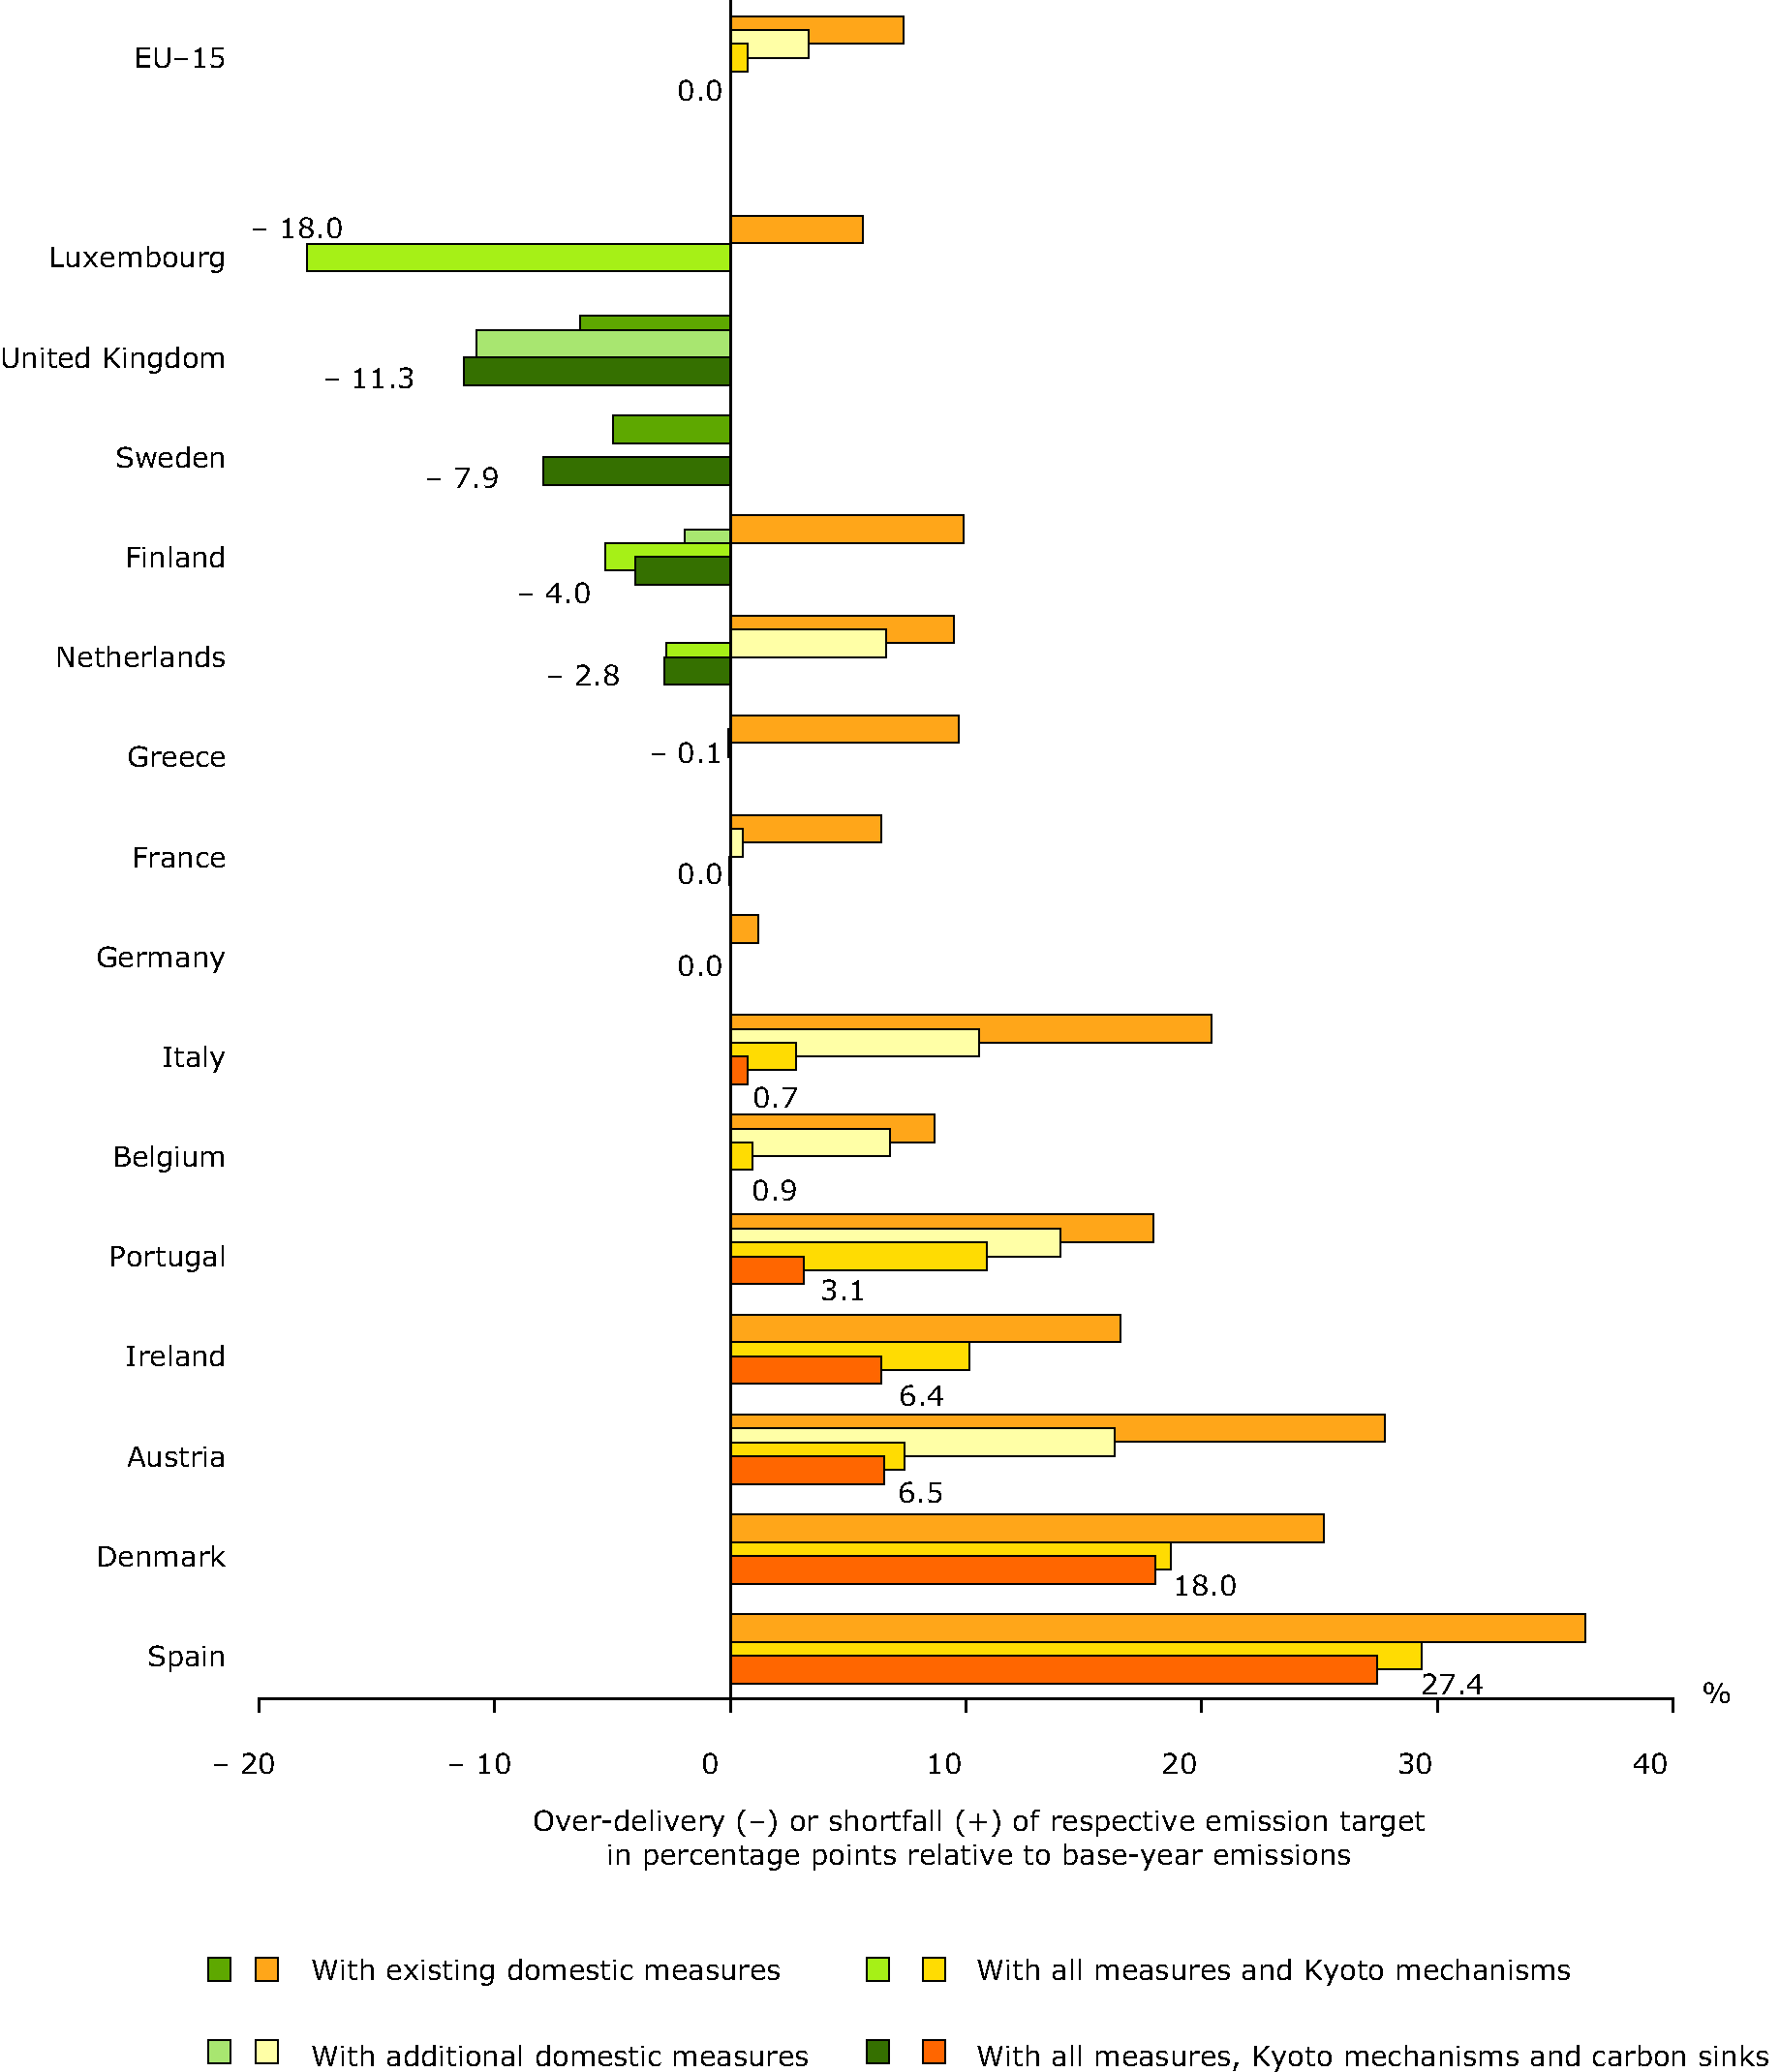 Relative gaps (over-delivery or shortfall) between greenhouse gas projections based on domestic policies and measures and 2010 targets for EU-15 Member States including the effects of Kyoto mechanisms and net emissions and removals from carbon sinks